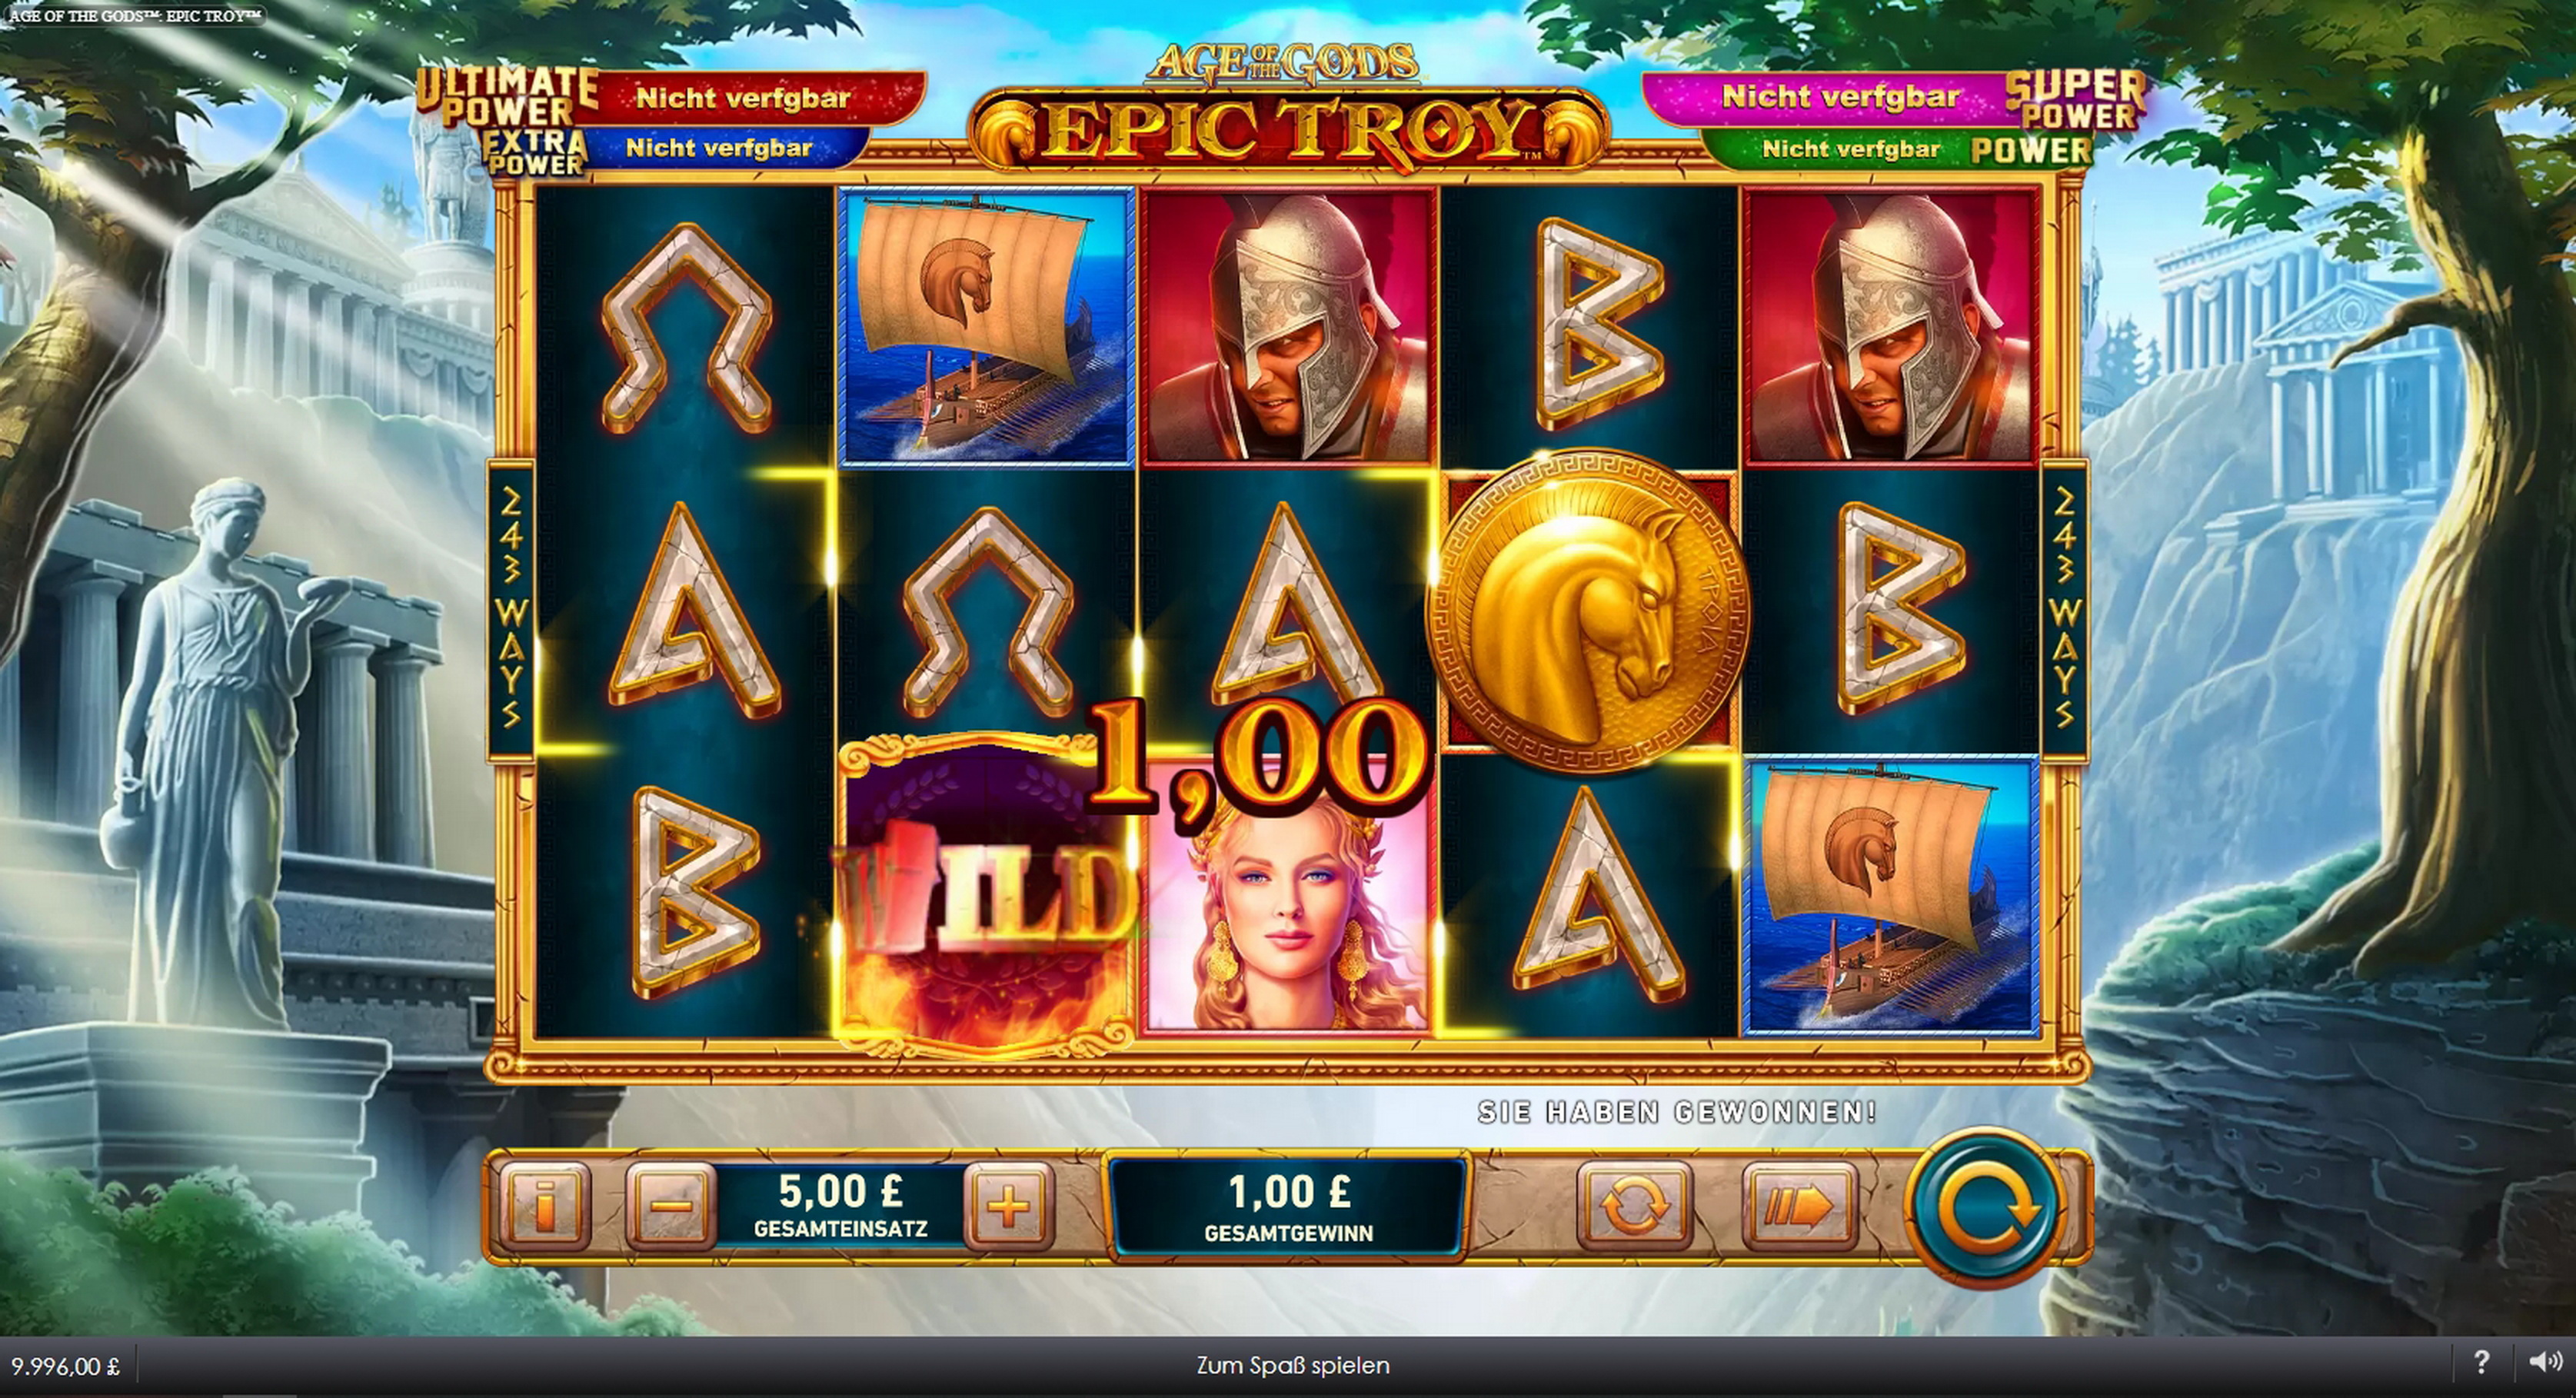 Win Money in Age of the Gods Epic Troy Free Slot Game by Playtech